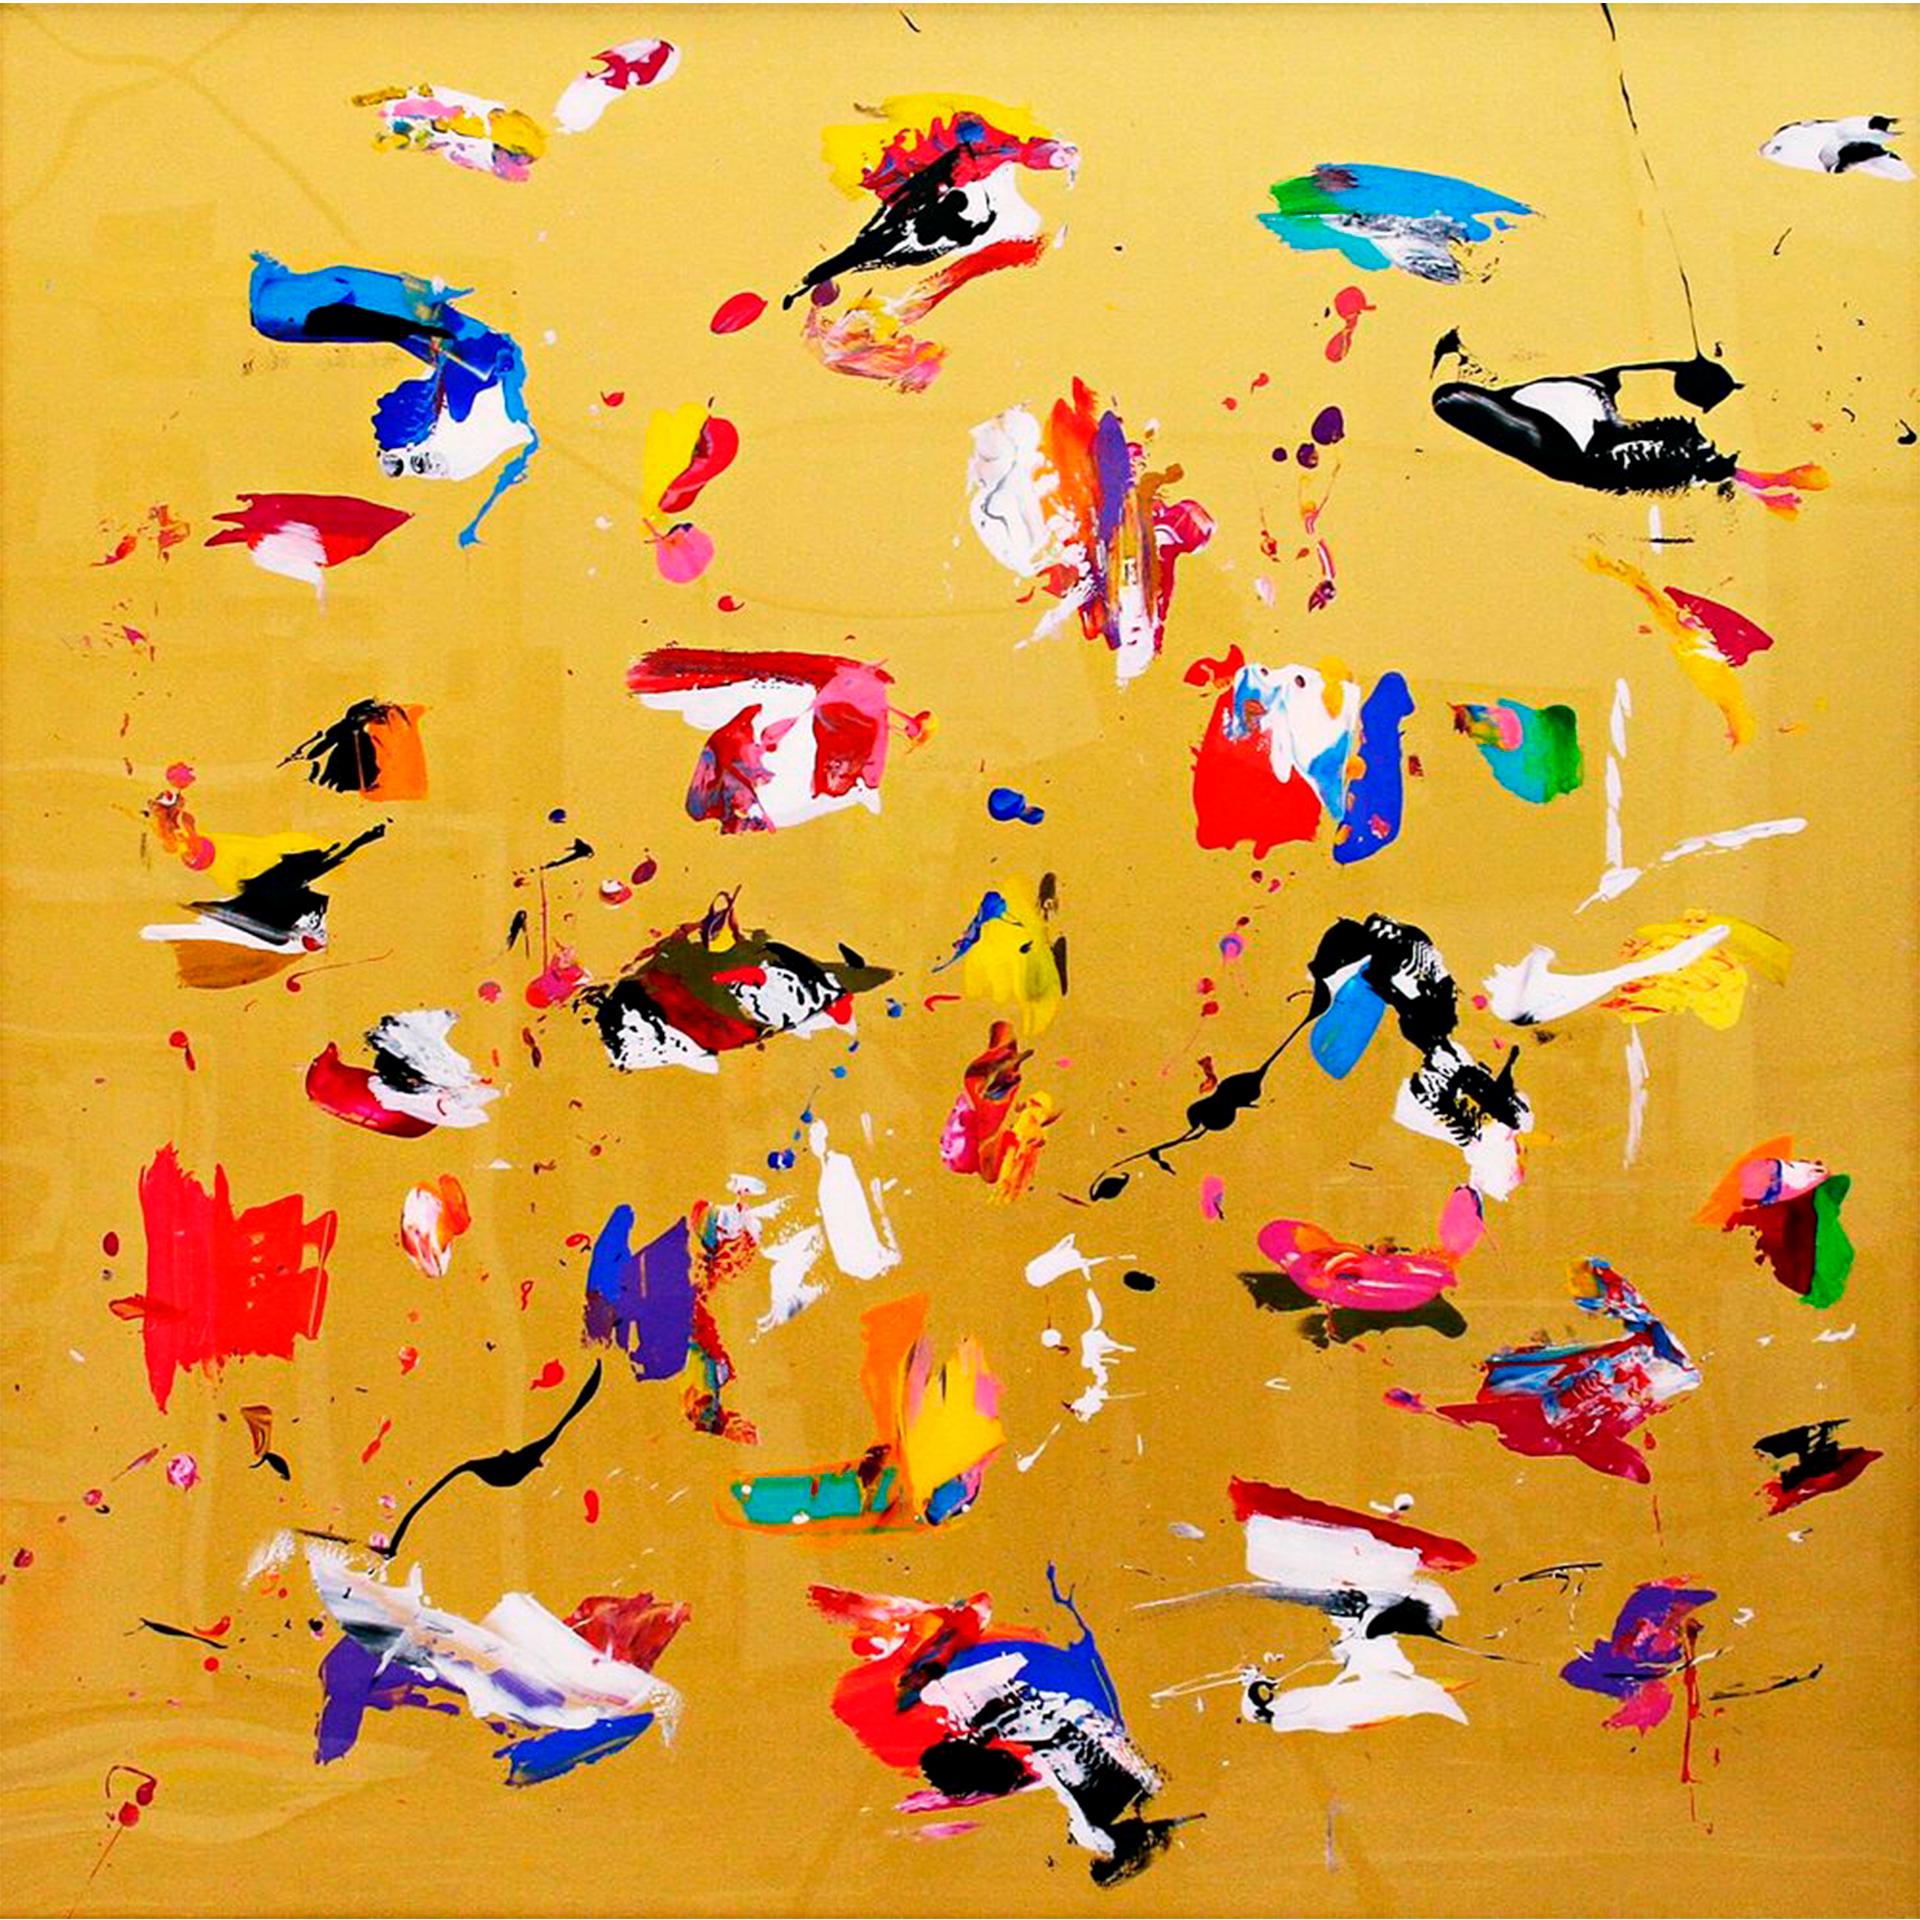 Santiago Picatoste

Atlas Gold, 2021

Enamel on methacrylate

Santiago Picatoste (1971, Palma de Mallorca) is a plastic artist and sculptor who was based in
Malaga for 10 years. His extensive biography extends back to 1998, with projects,